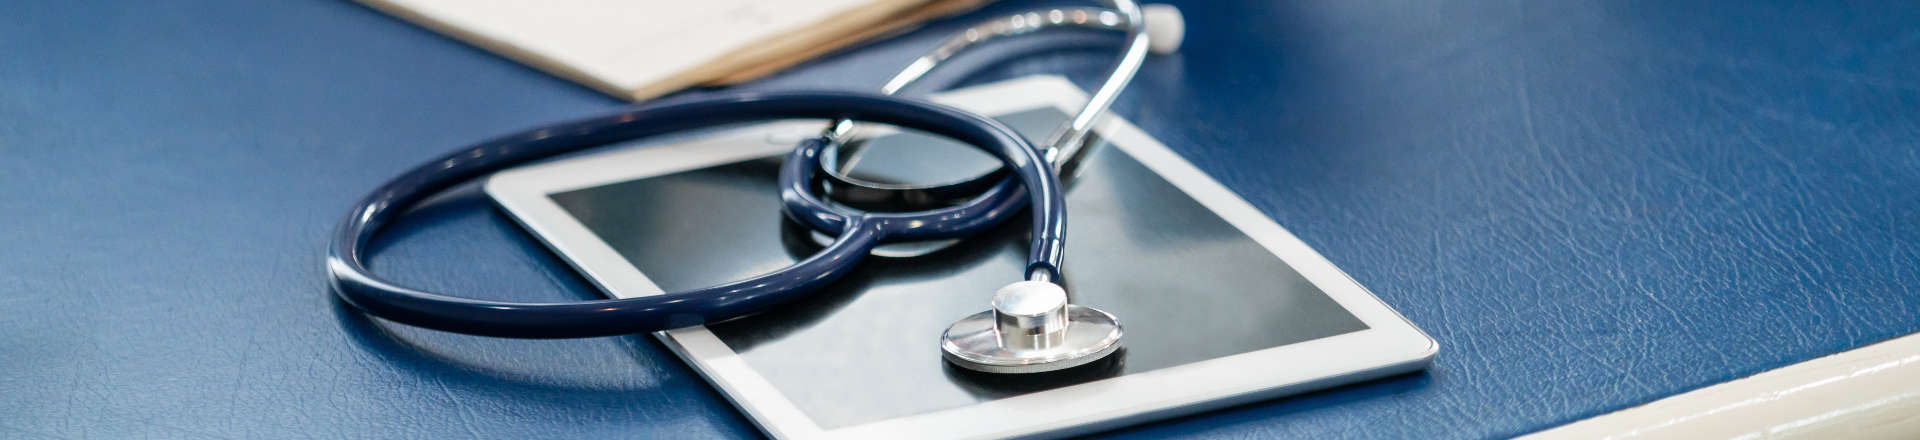 a stethoscope and a tablet